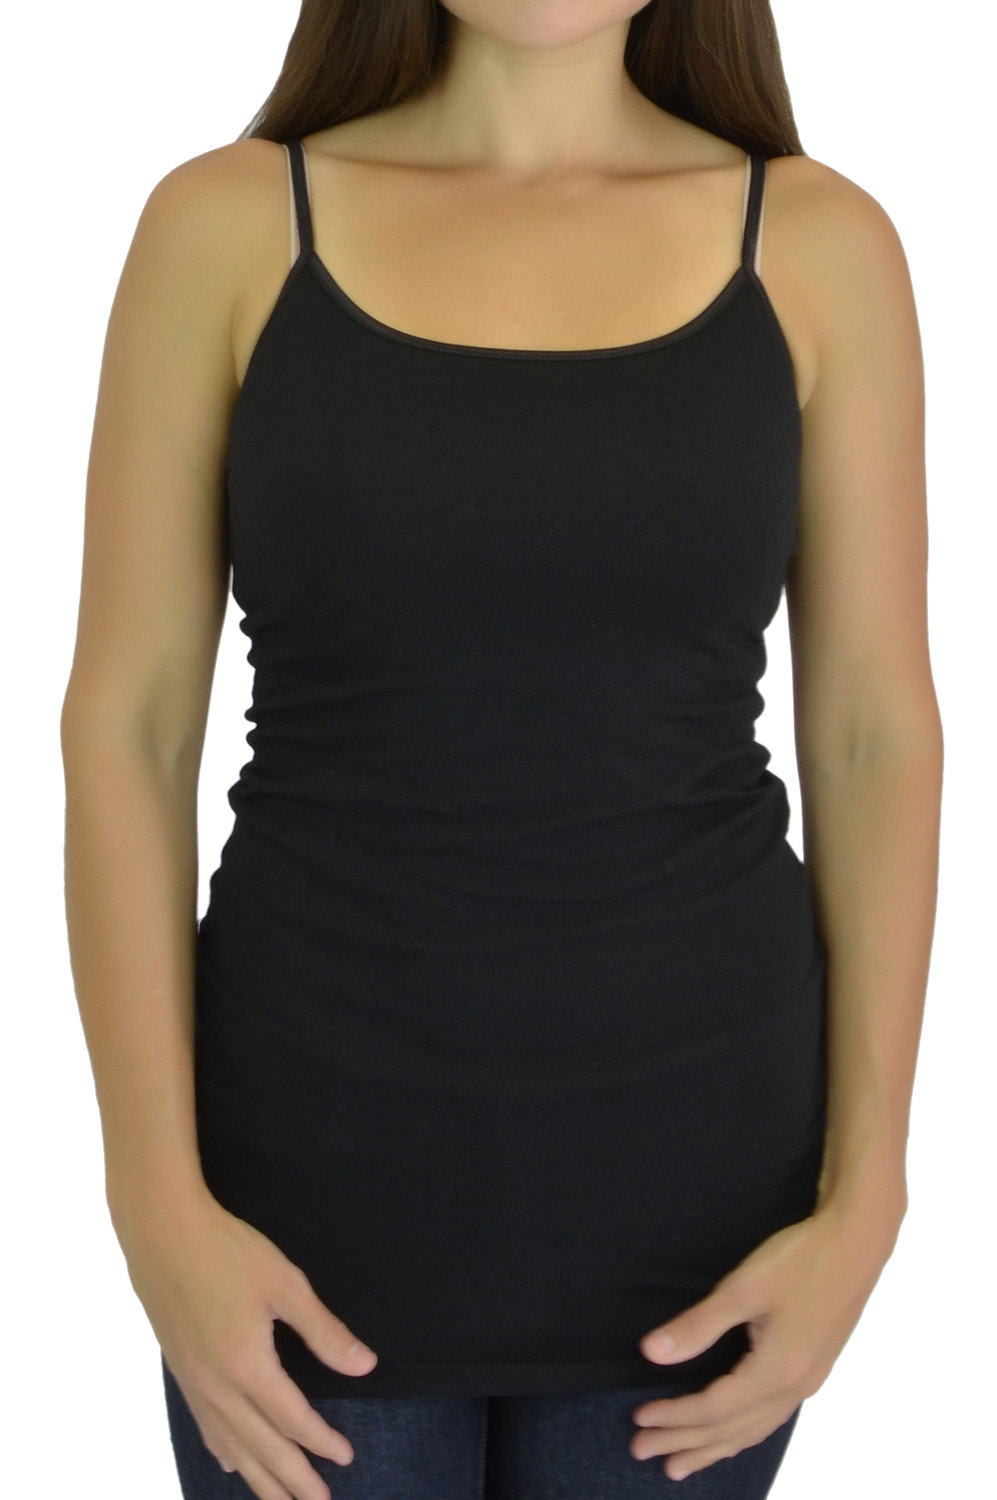 Belle Donne Tanktop for Women Extra Long Cami Tank Top with Built in Shelf Bra Cotton - Black Small